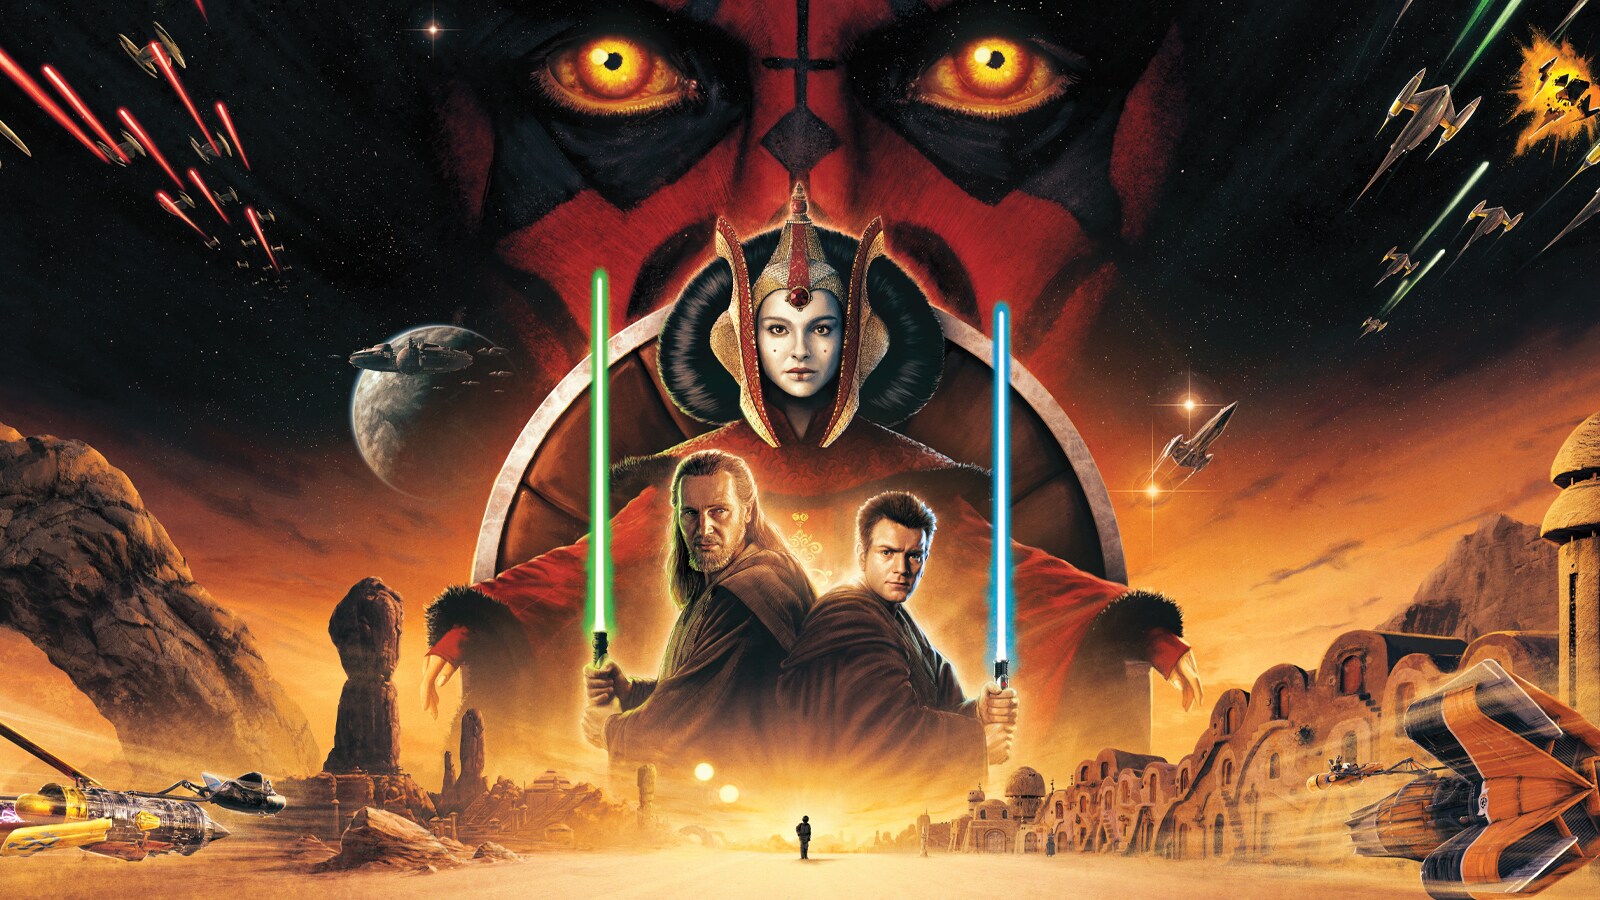 Star Wars: The Phantom Menace Celebrates 25 Years with Return to Theaters - Updated